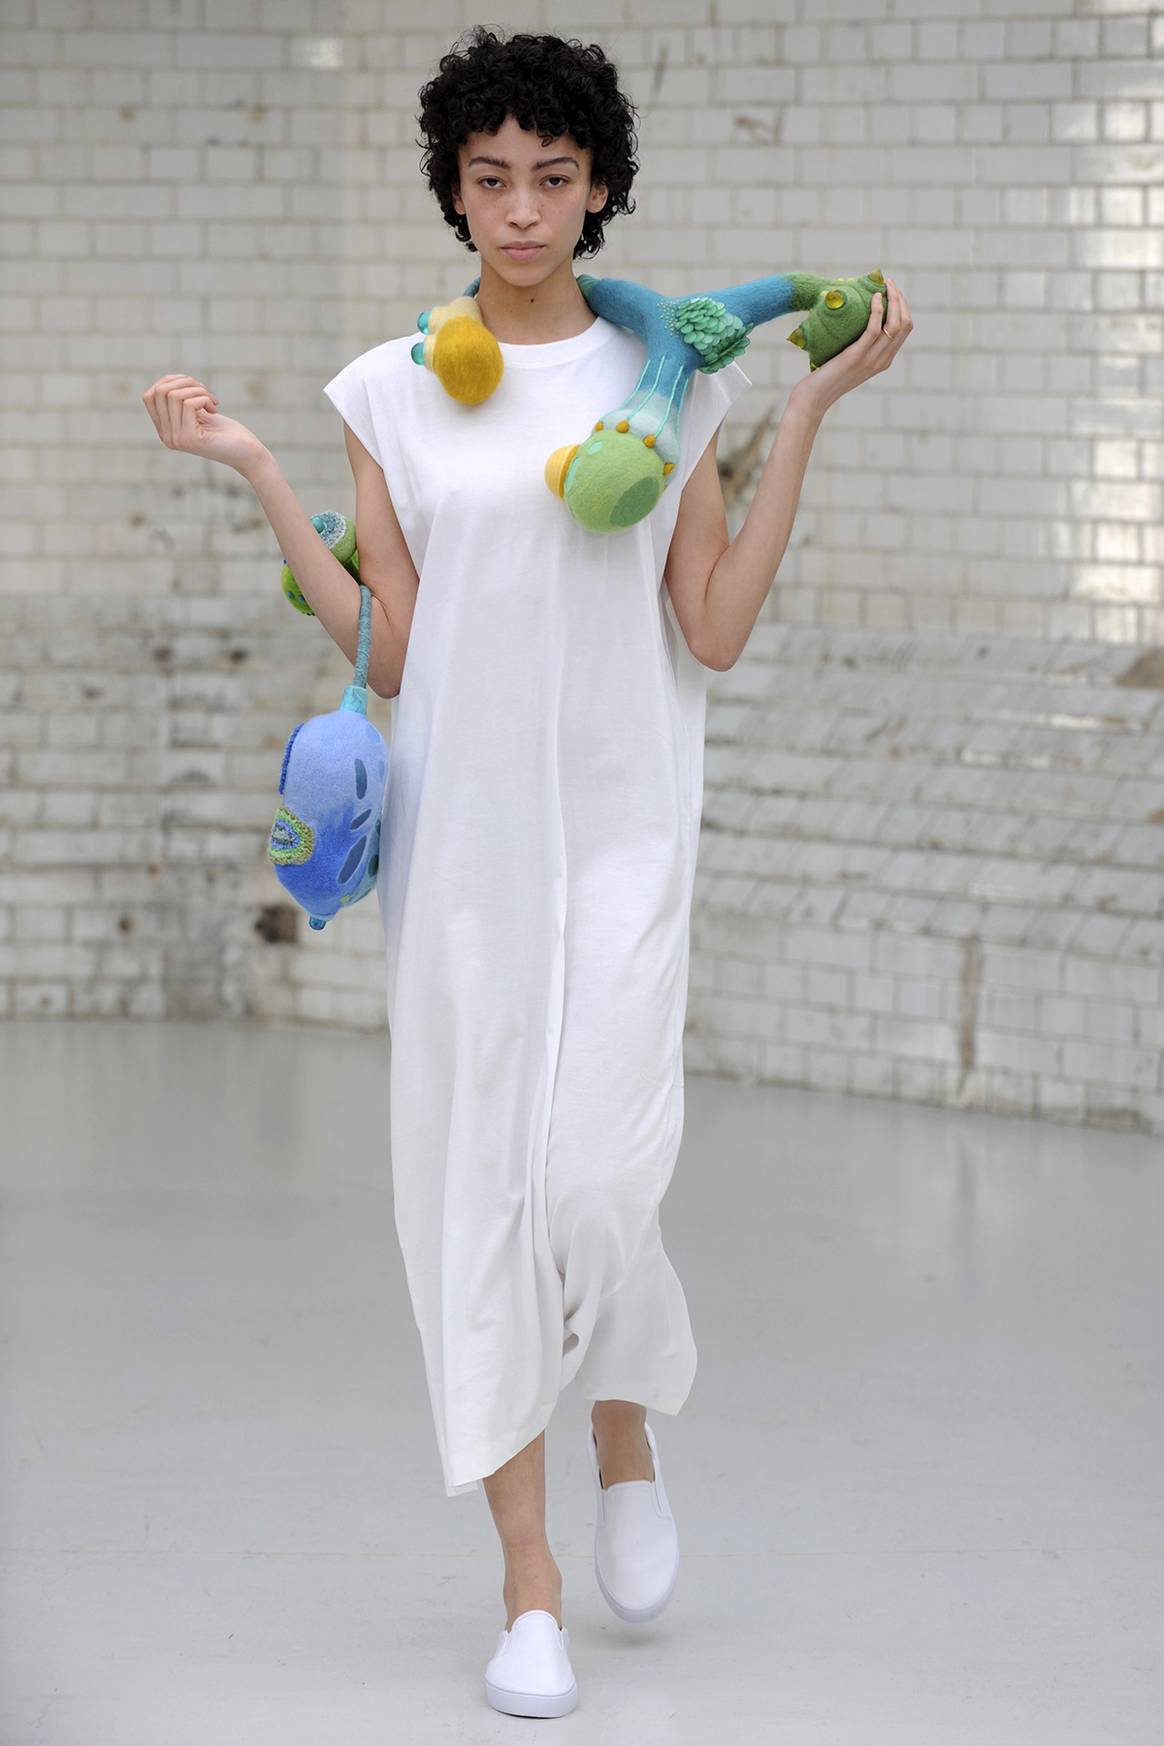 In Pictures: London College of Fashion presents MA22 show at London Fashion Week